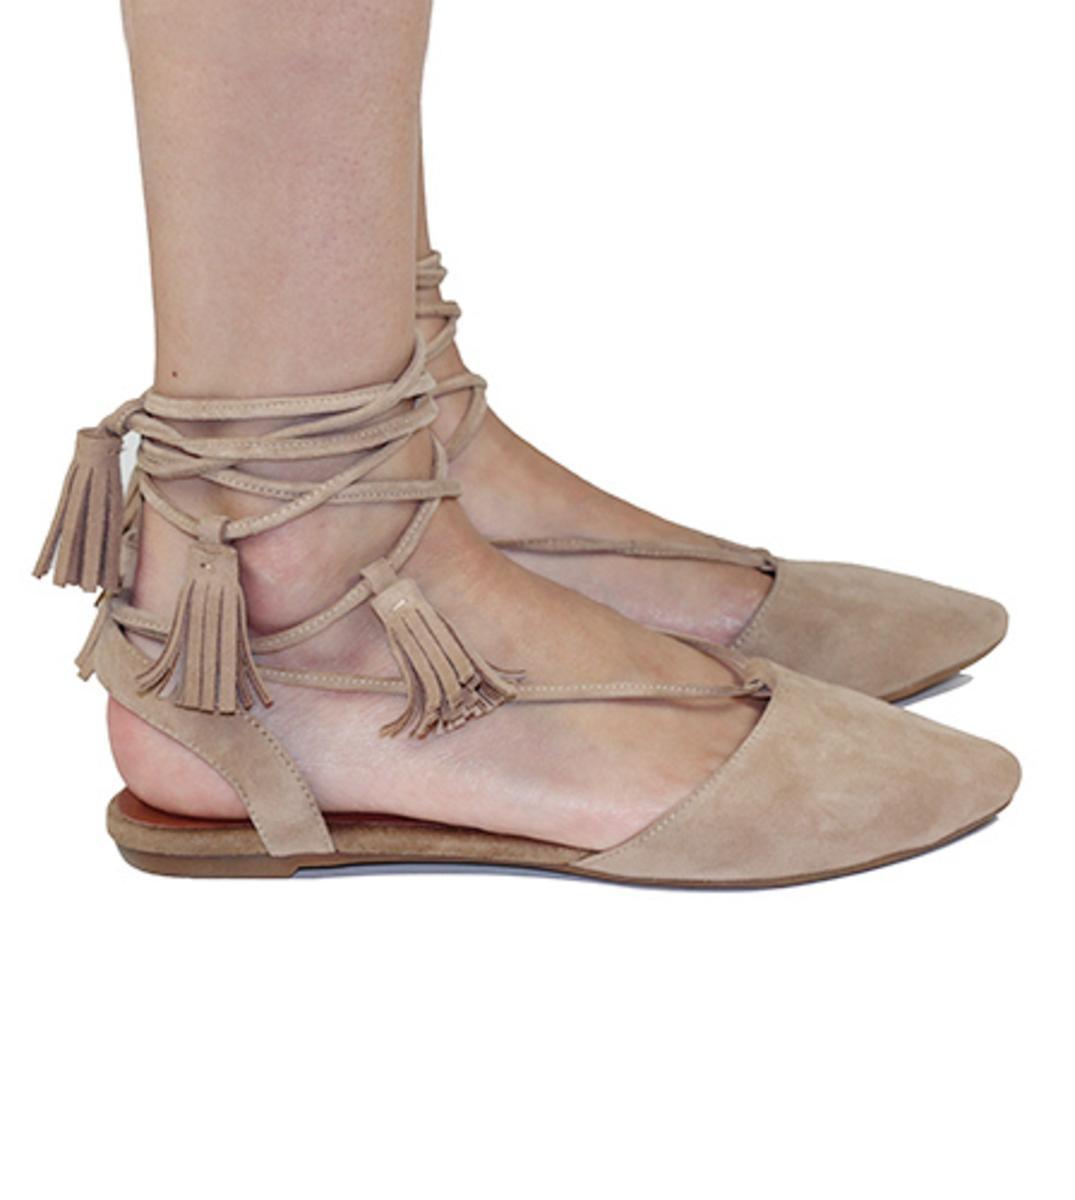 Jeffrey Campbell: Amour Nude Suede Flats